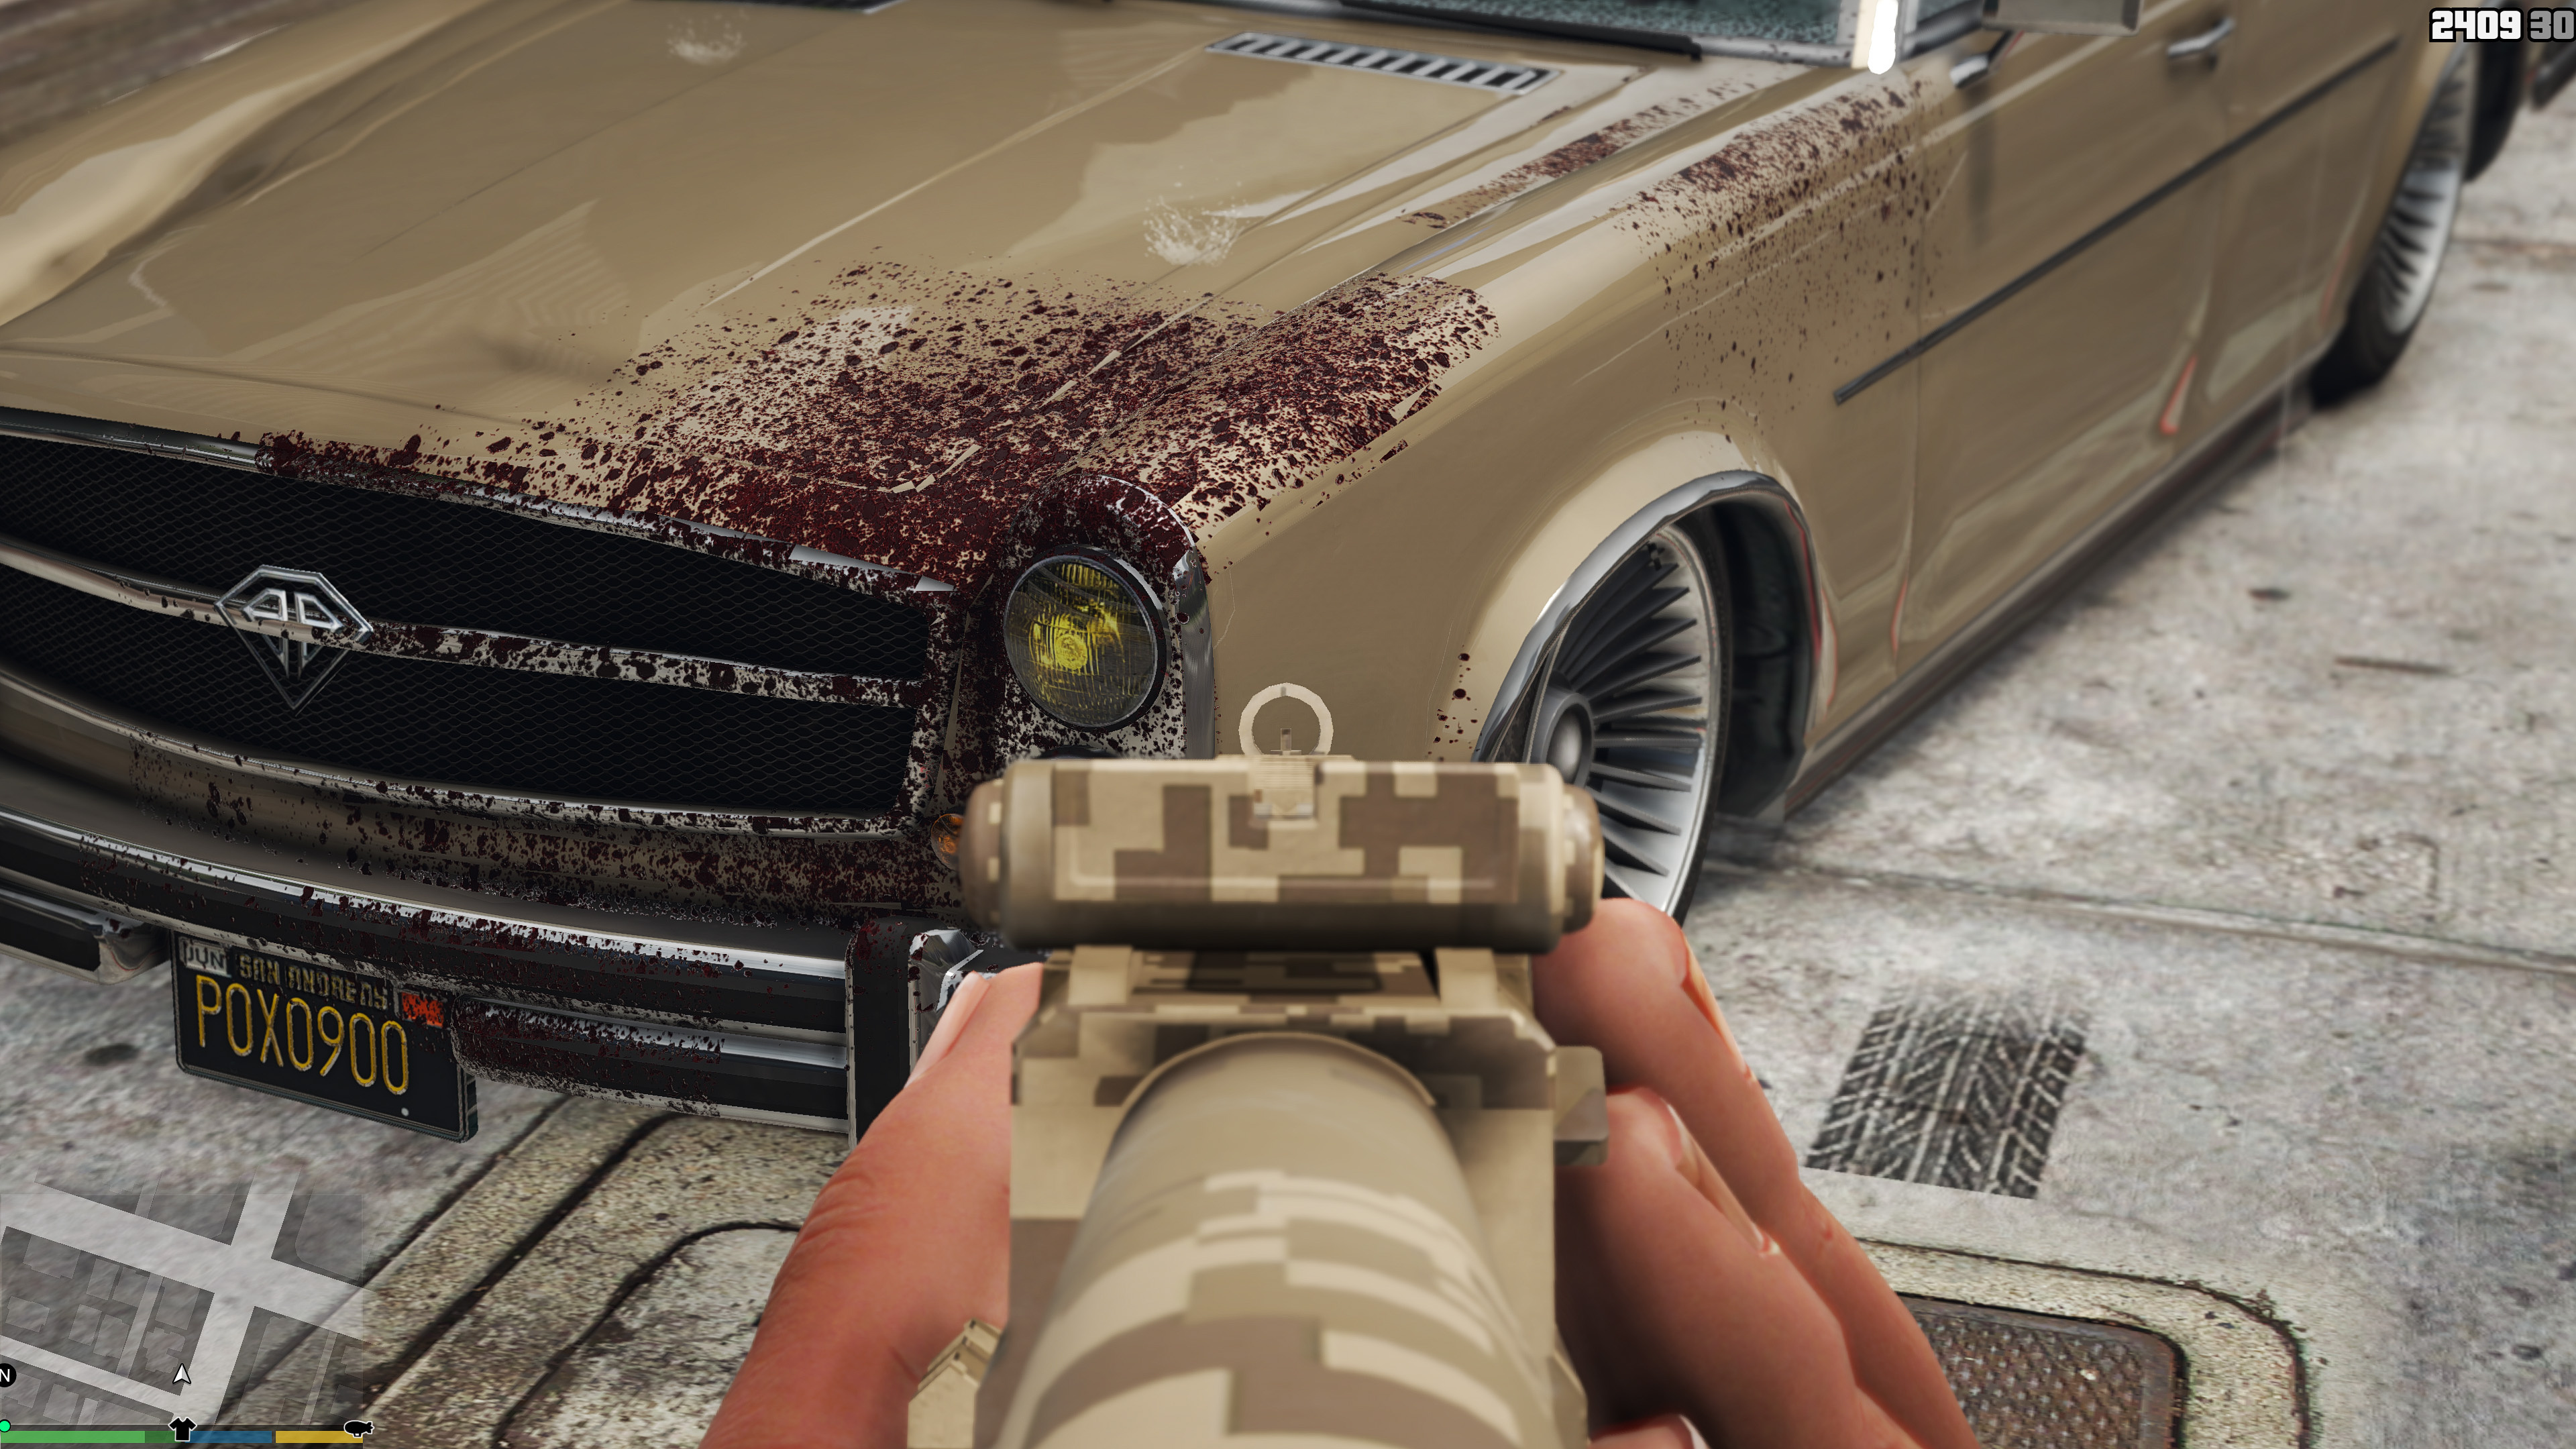 Gta 5 blood and decals фото 21